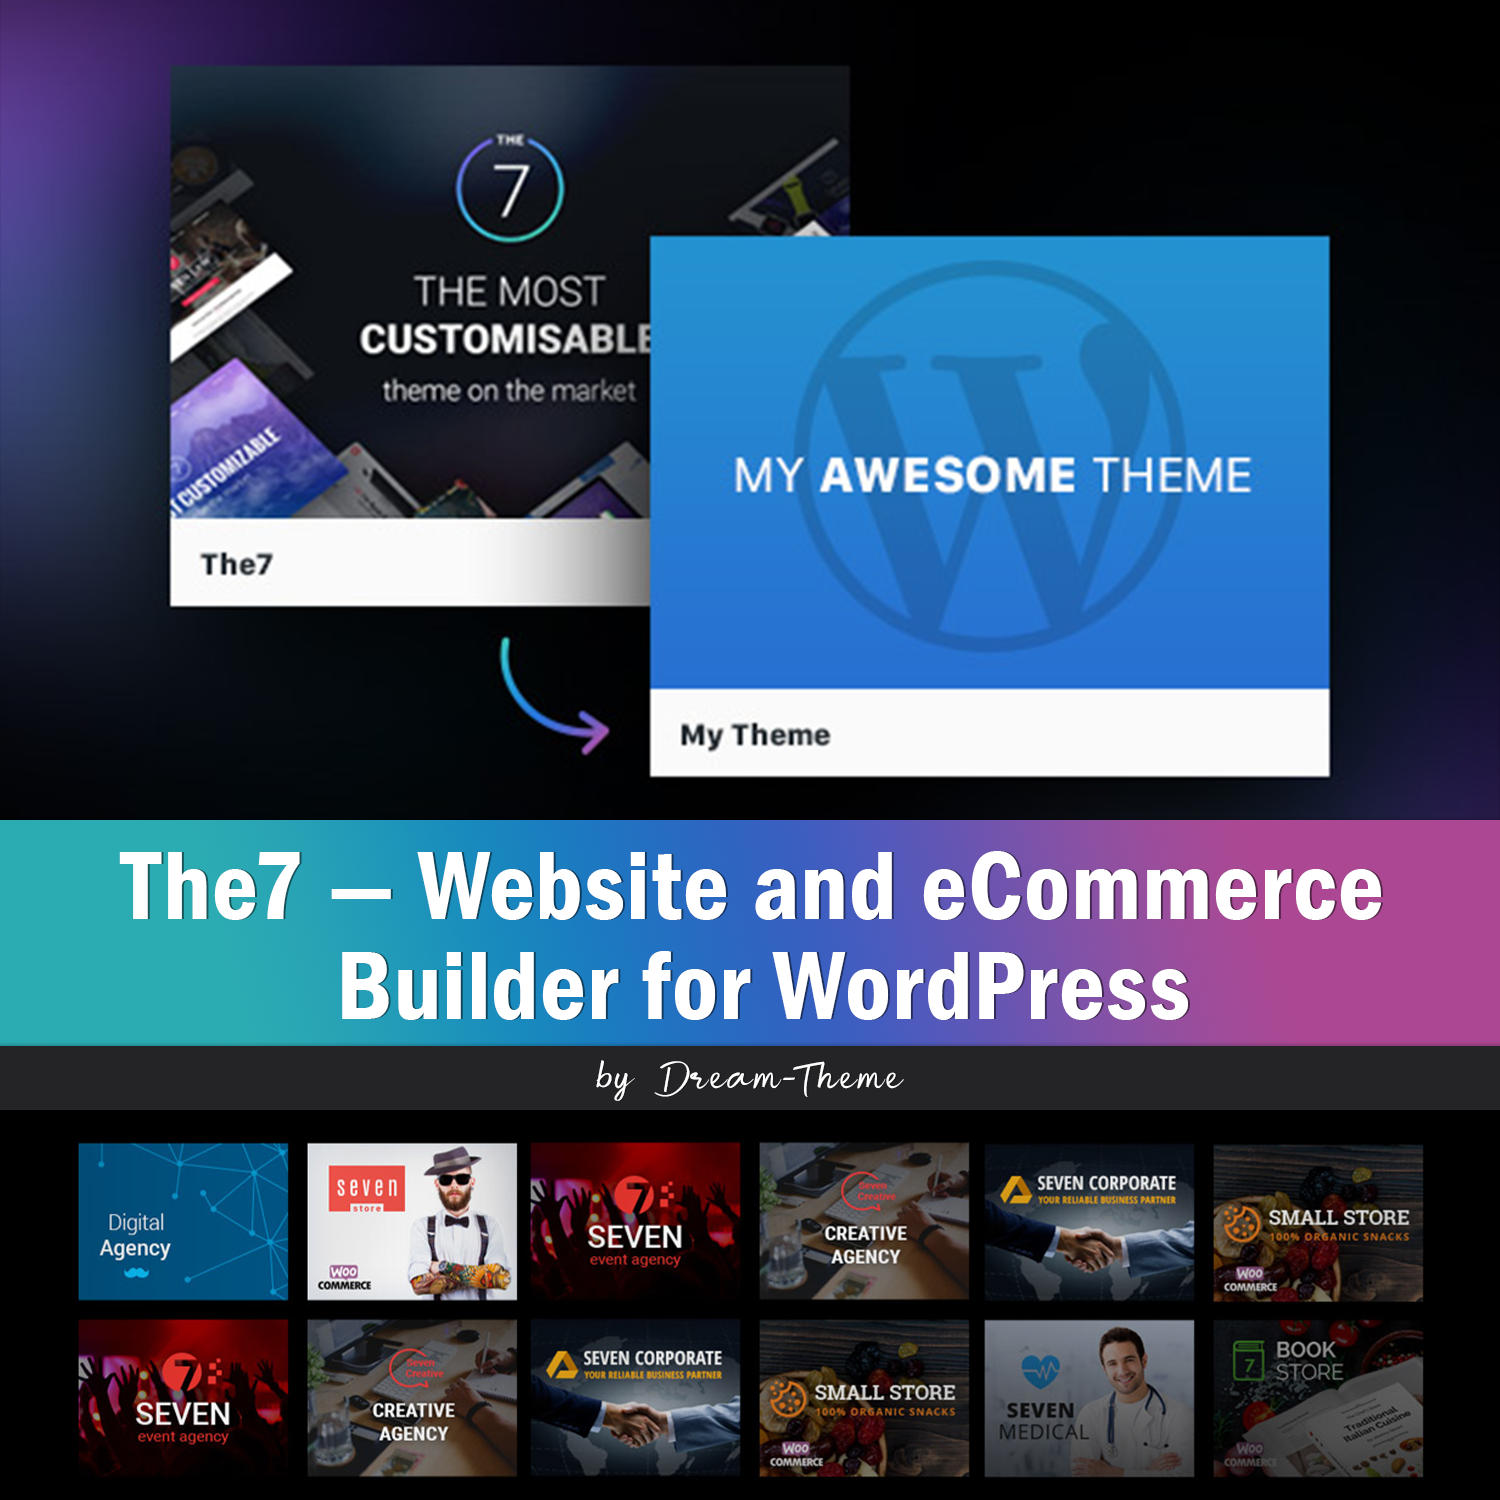 Preview website and ecommerce builder for wordpress.